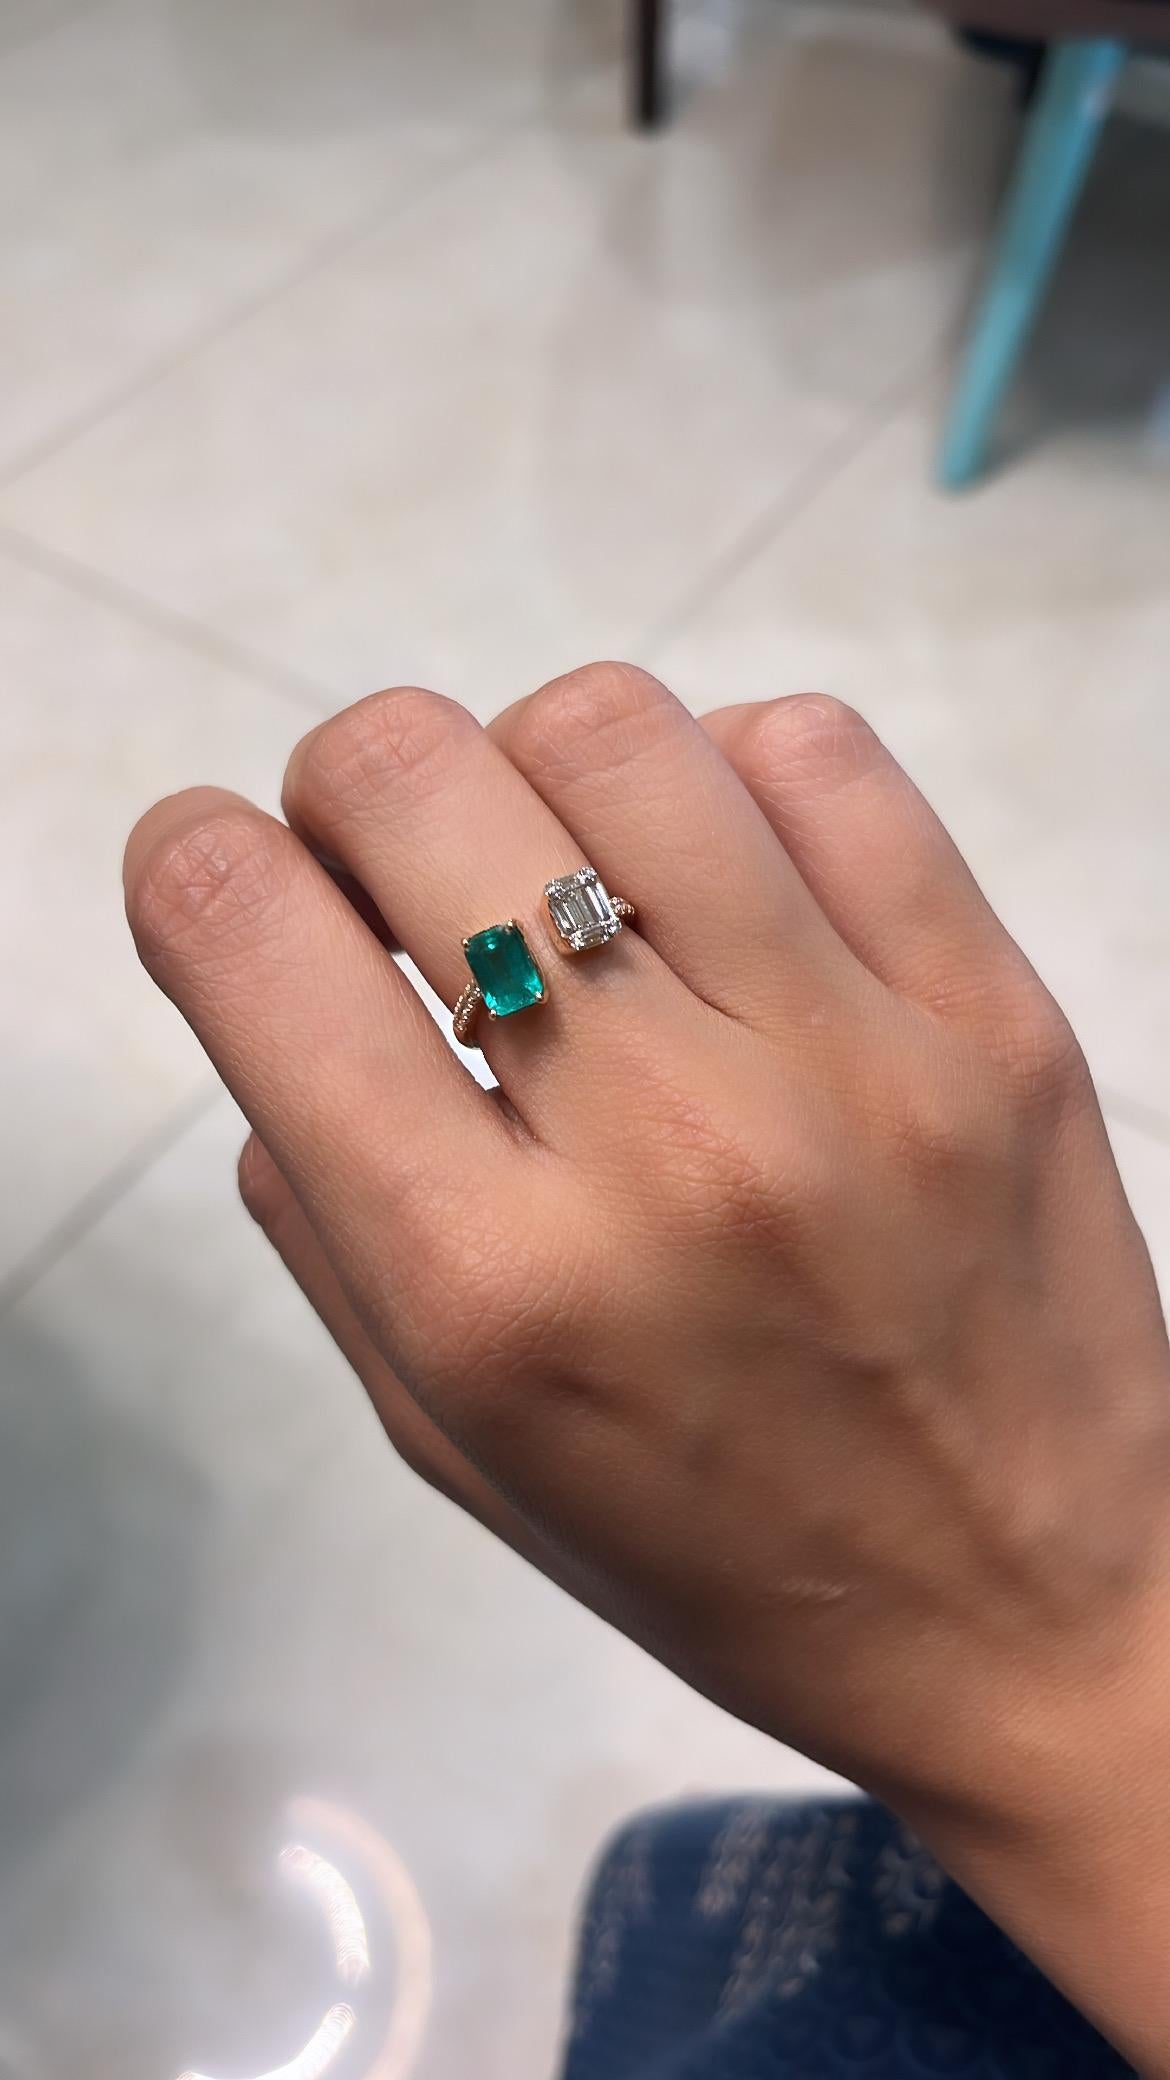 A very dainty and beautiful, Emerald Engagement/ Cluster Ring set in 18k Rose Gold & Diamonds. The weight of the Emerald is 1.12 carats. The Emerald is completely natural, without any treatment and is of Zambian origin. The weight of the Diamonds is